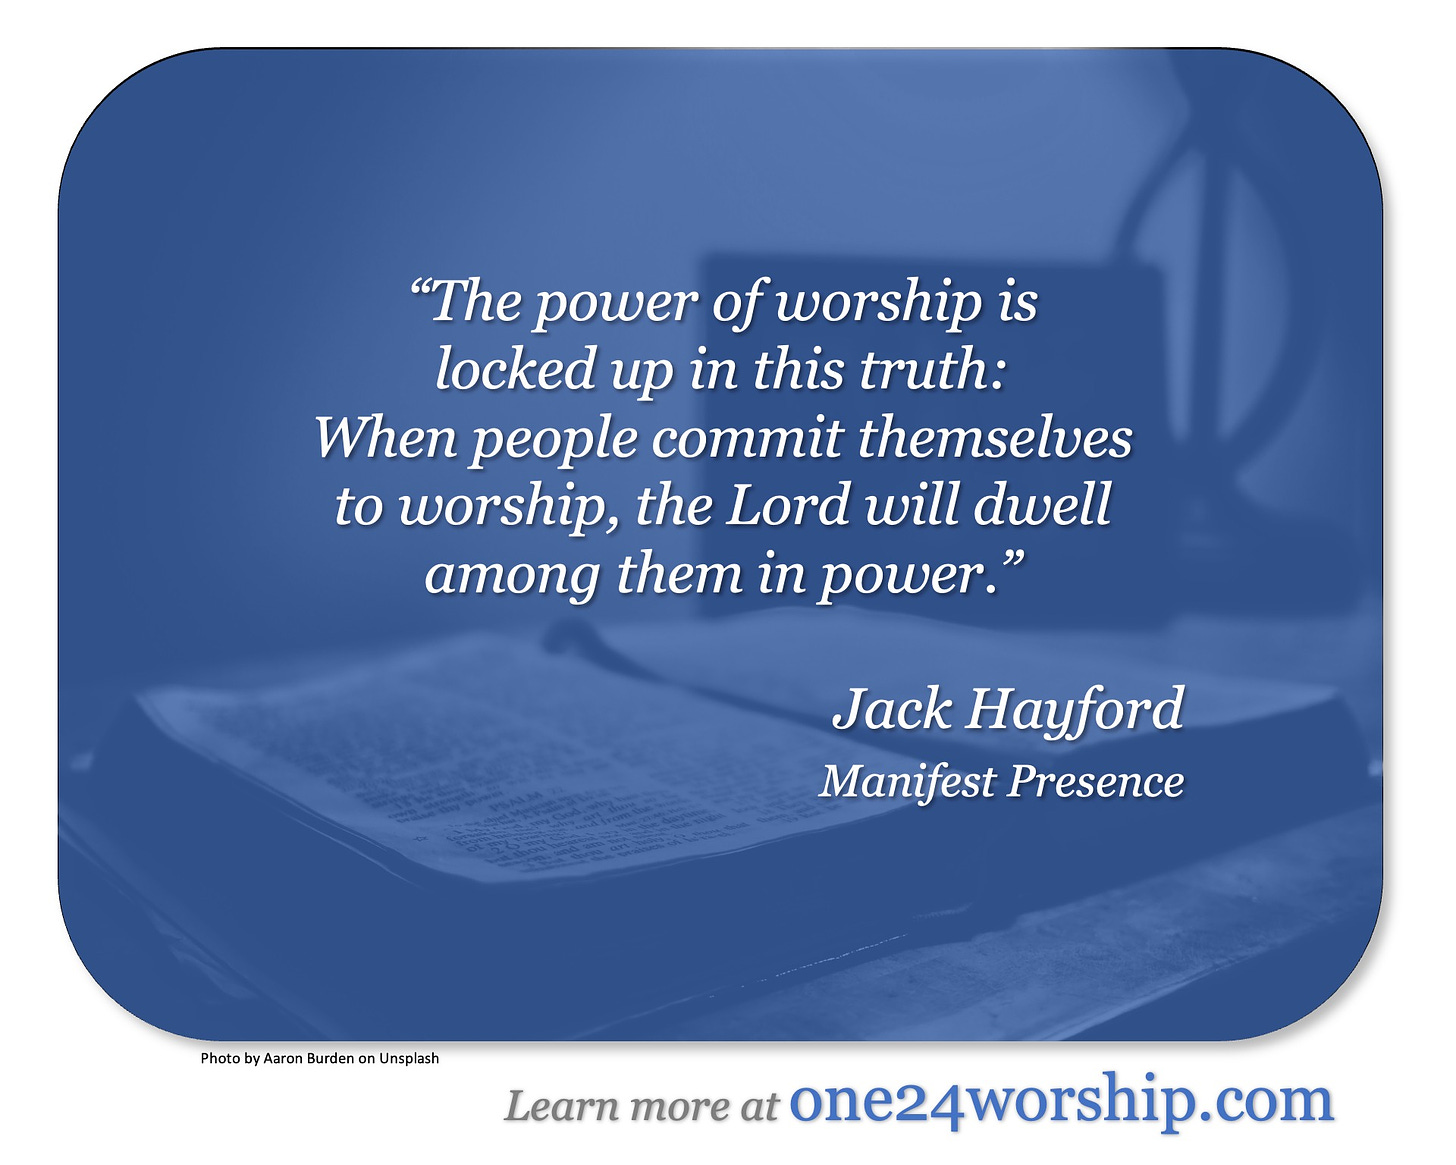 Image of an open Bible on a desk with a framed picture under a lamp with Jack Hayford quote superimposed.